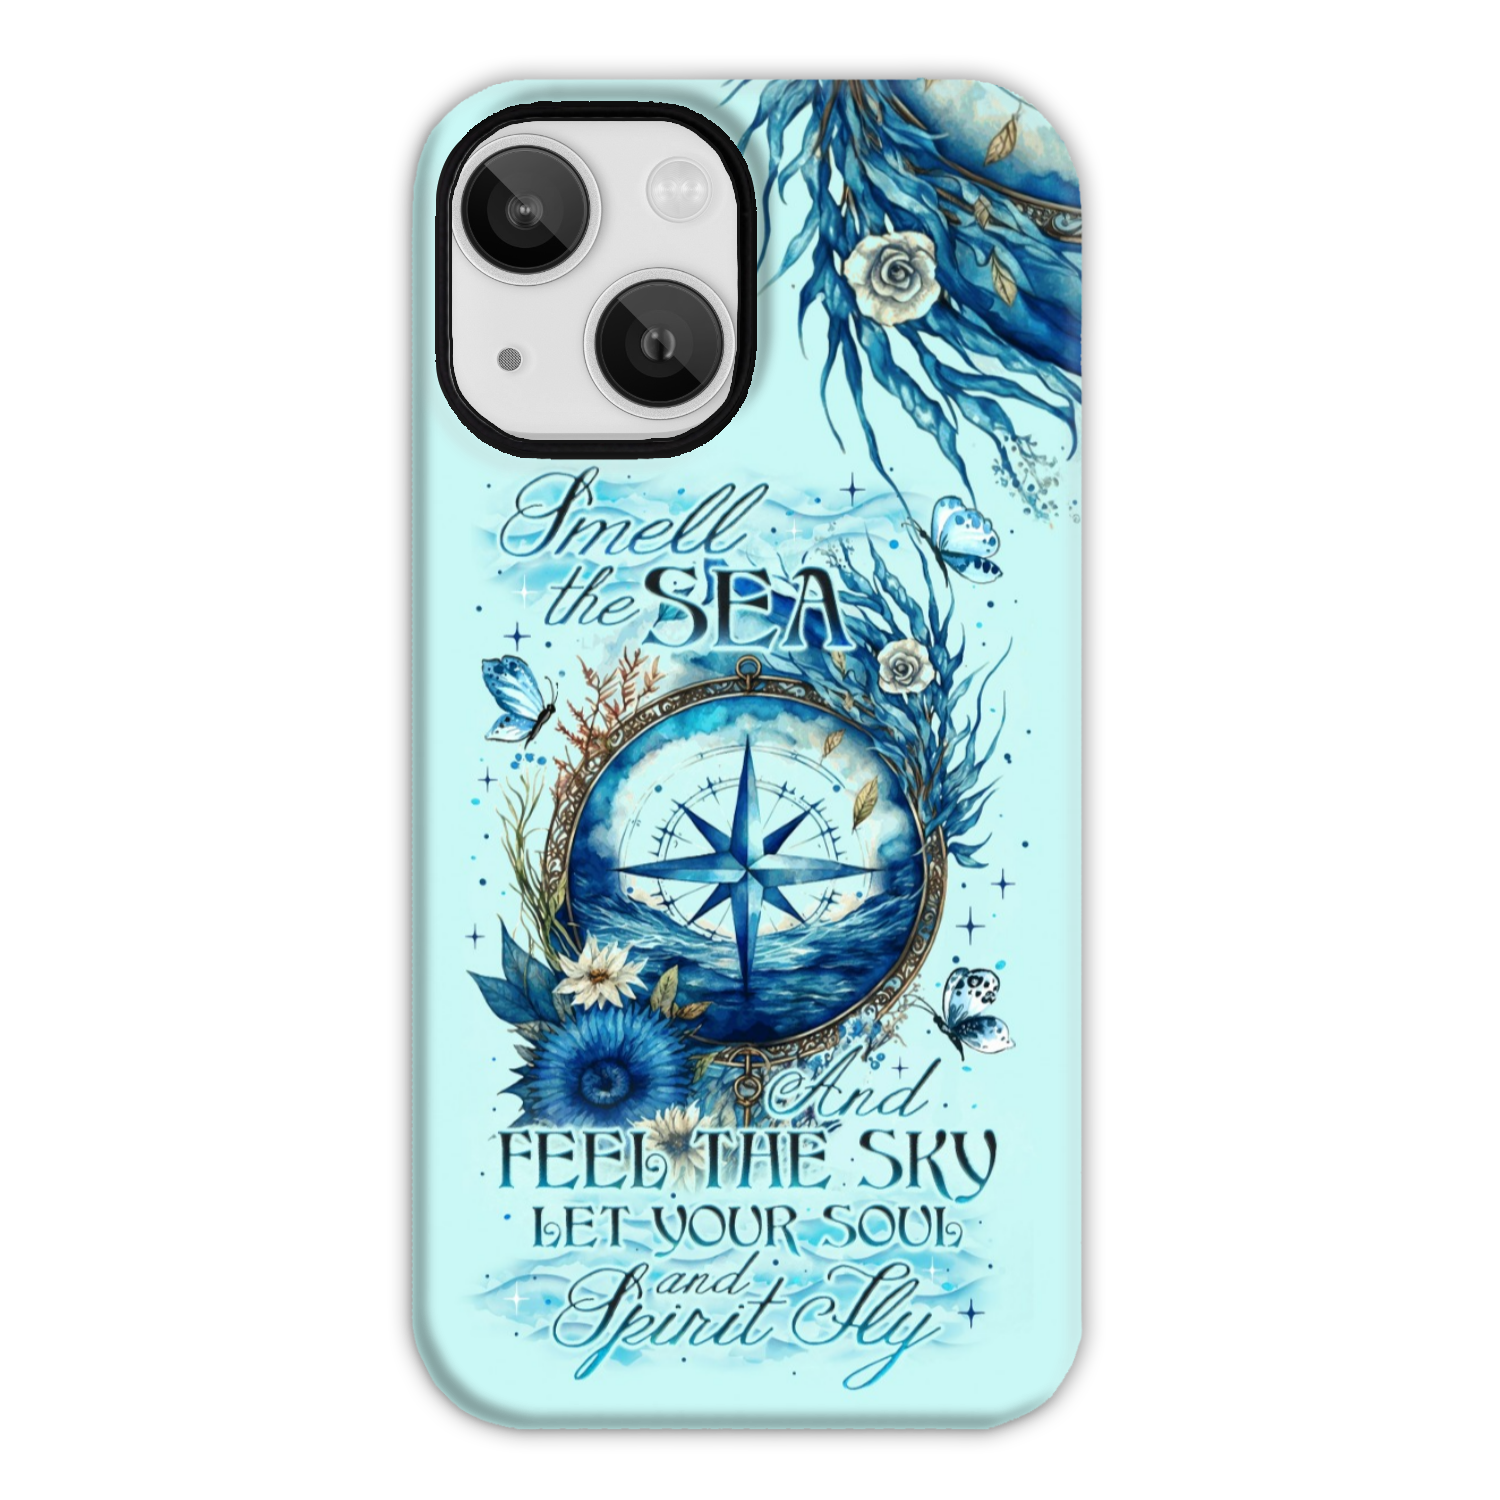 SMELL THE SEA AND FEEL THE SKY PHONE CASE - TY2205237